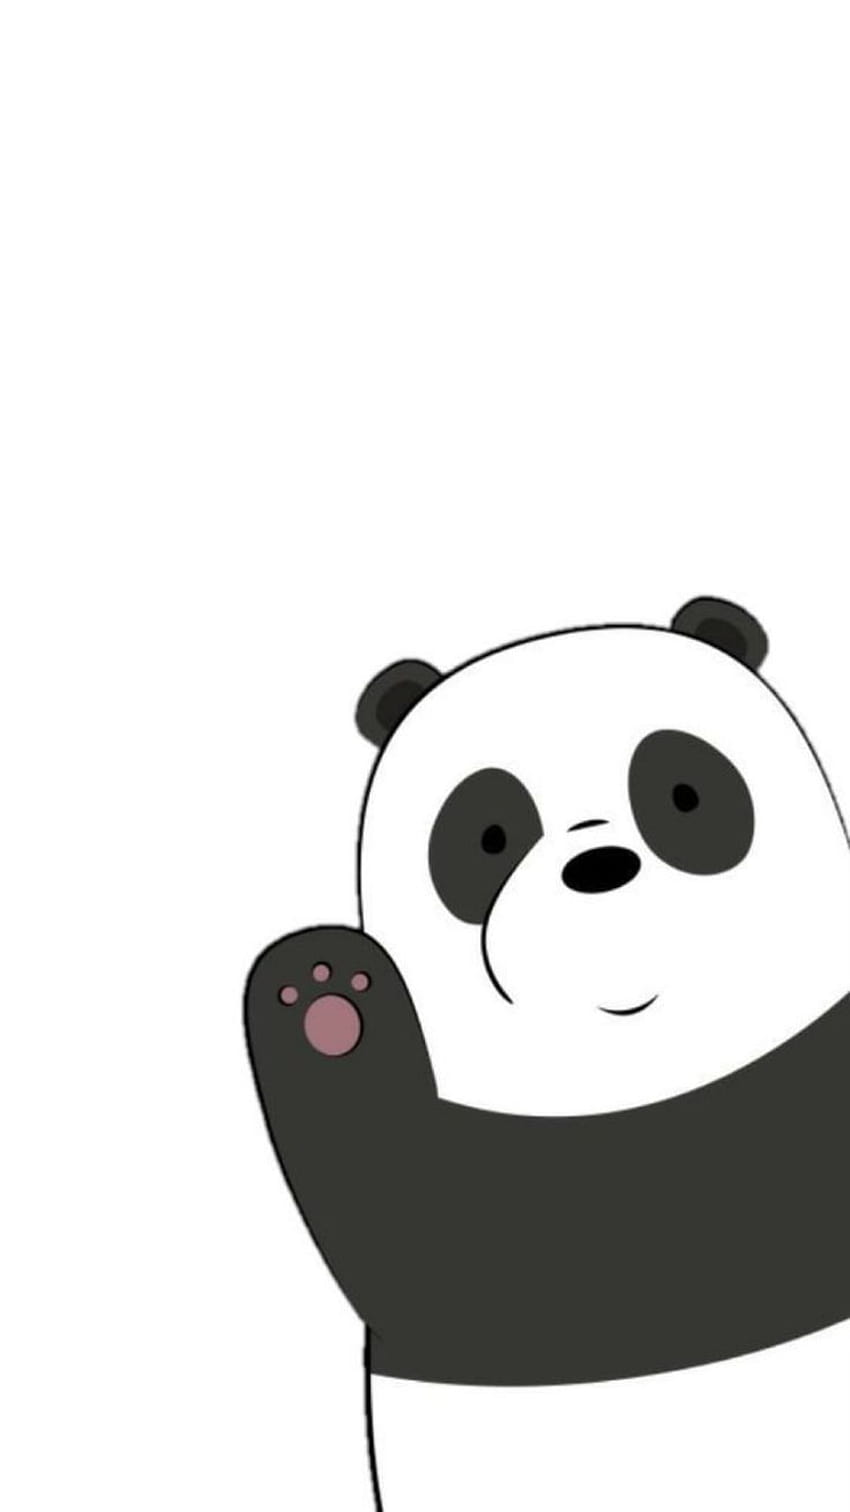 Free: Report Abuse - We Bare Bears Wallpaper Hd - nohat.cc